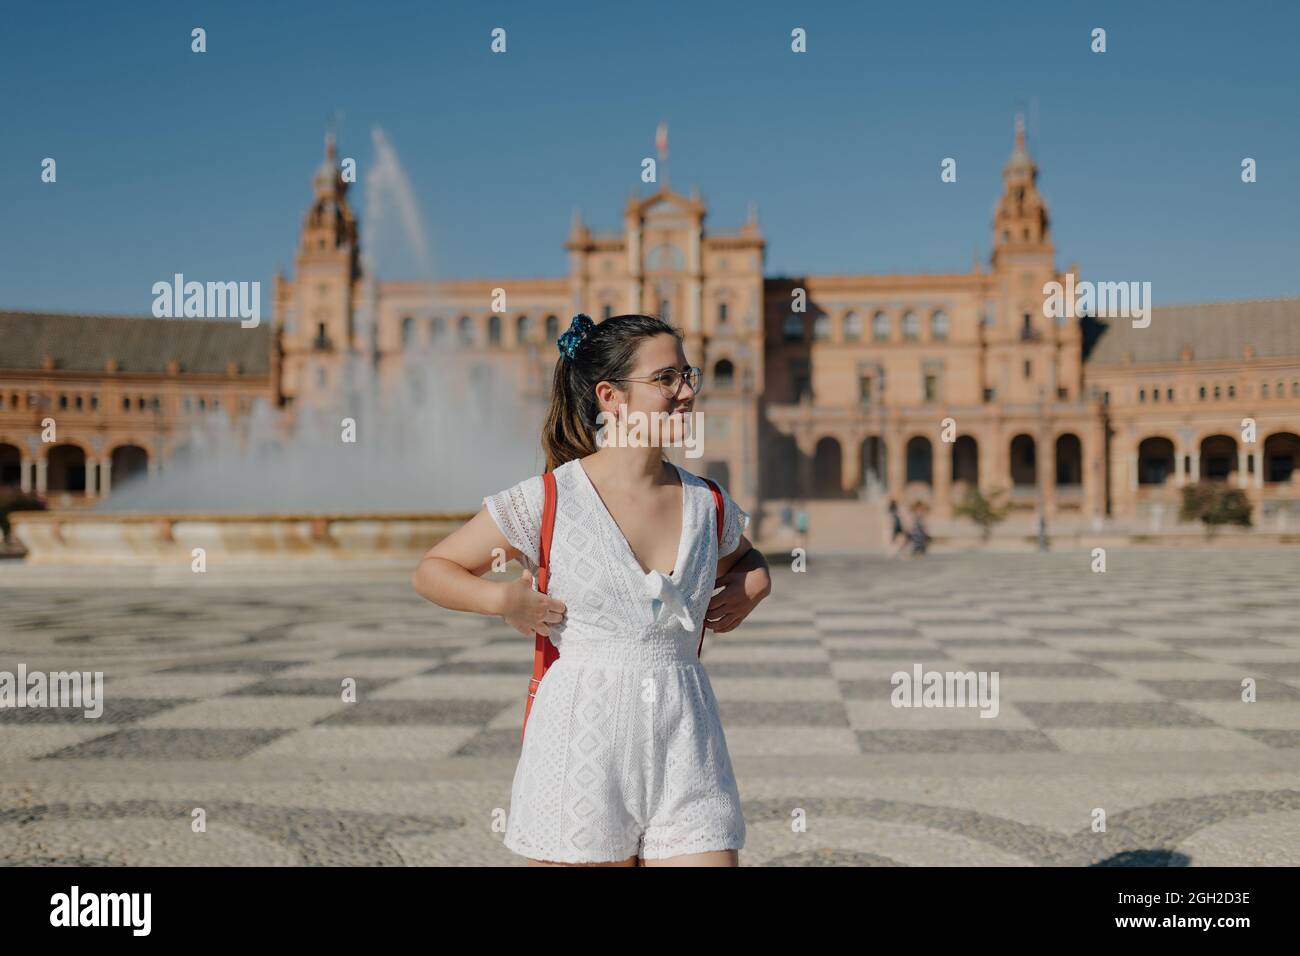 Young tourist woman with glasses wearing a white dress and red backpack is looking away and smiling while standing in the Plaza de España of Seville. Stock Photo